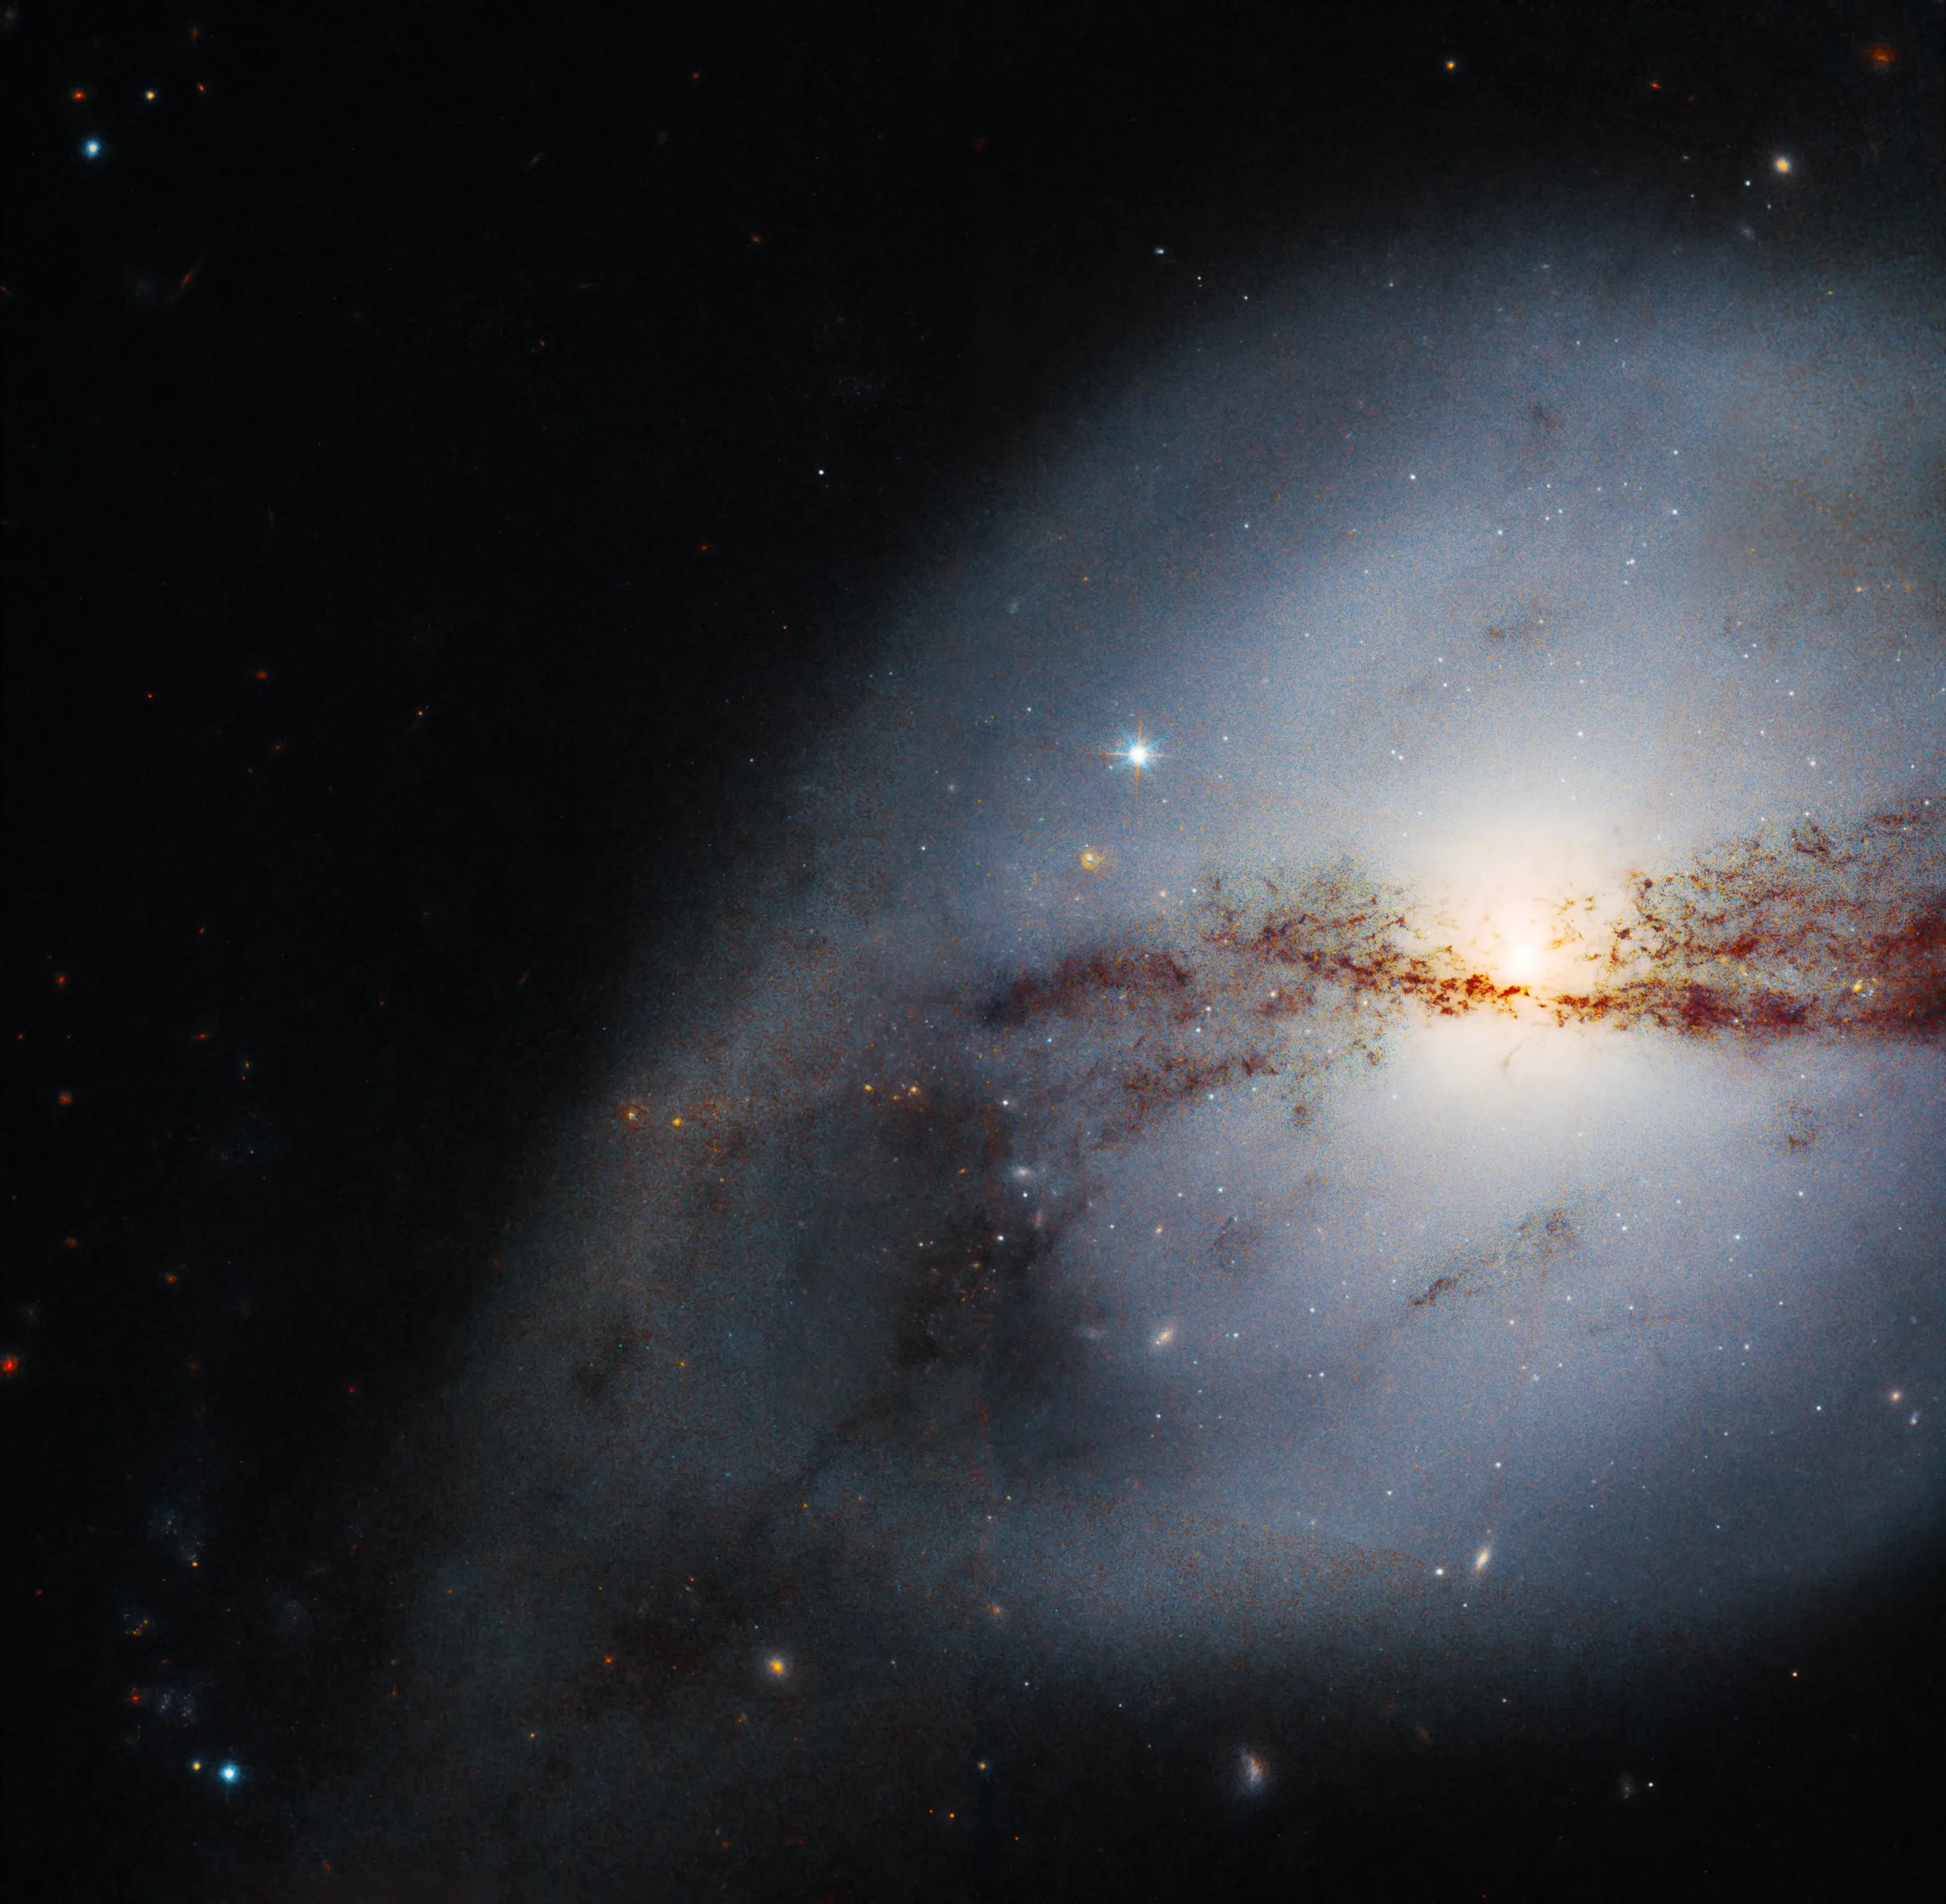 Right two-thirds of the image: nearly spherical galaxy with bright core (center right), horizontal dust lane bisects the galaxy, gas and dust loop extends to lower left of the galaxy